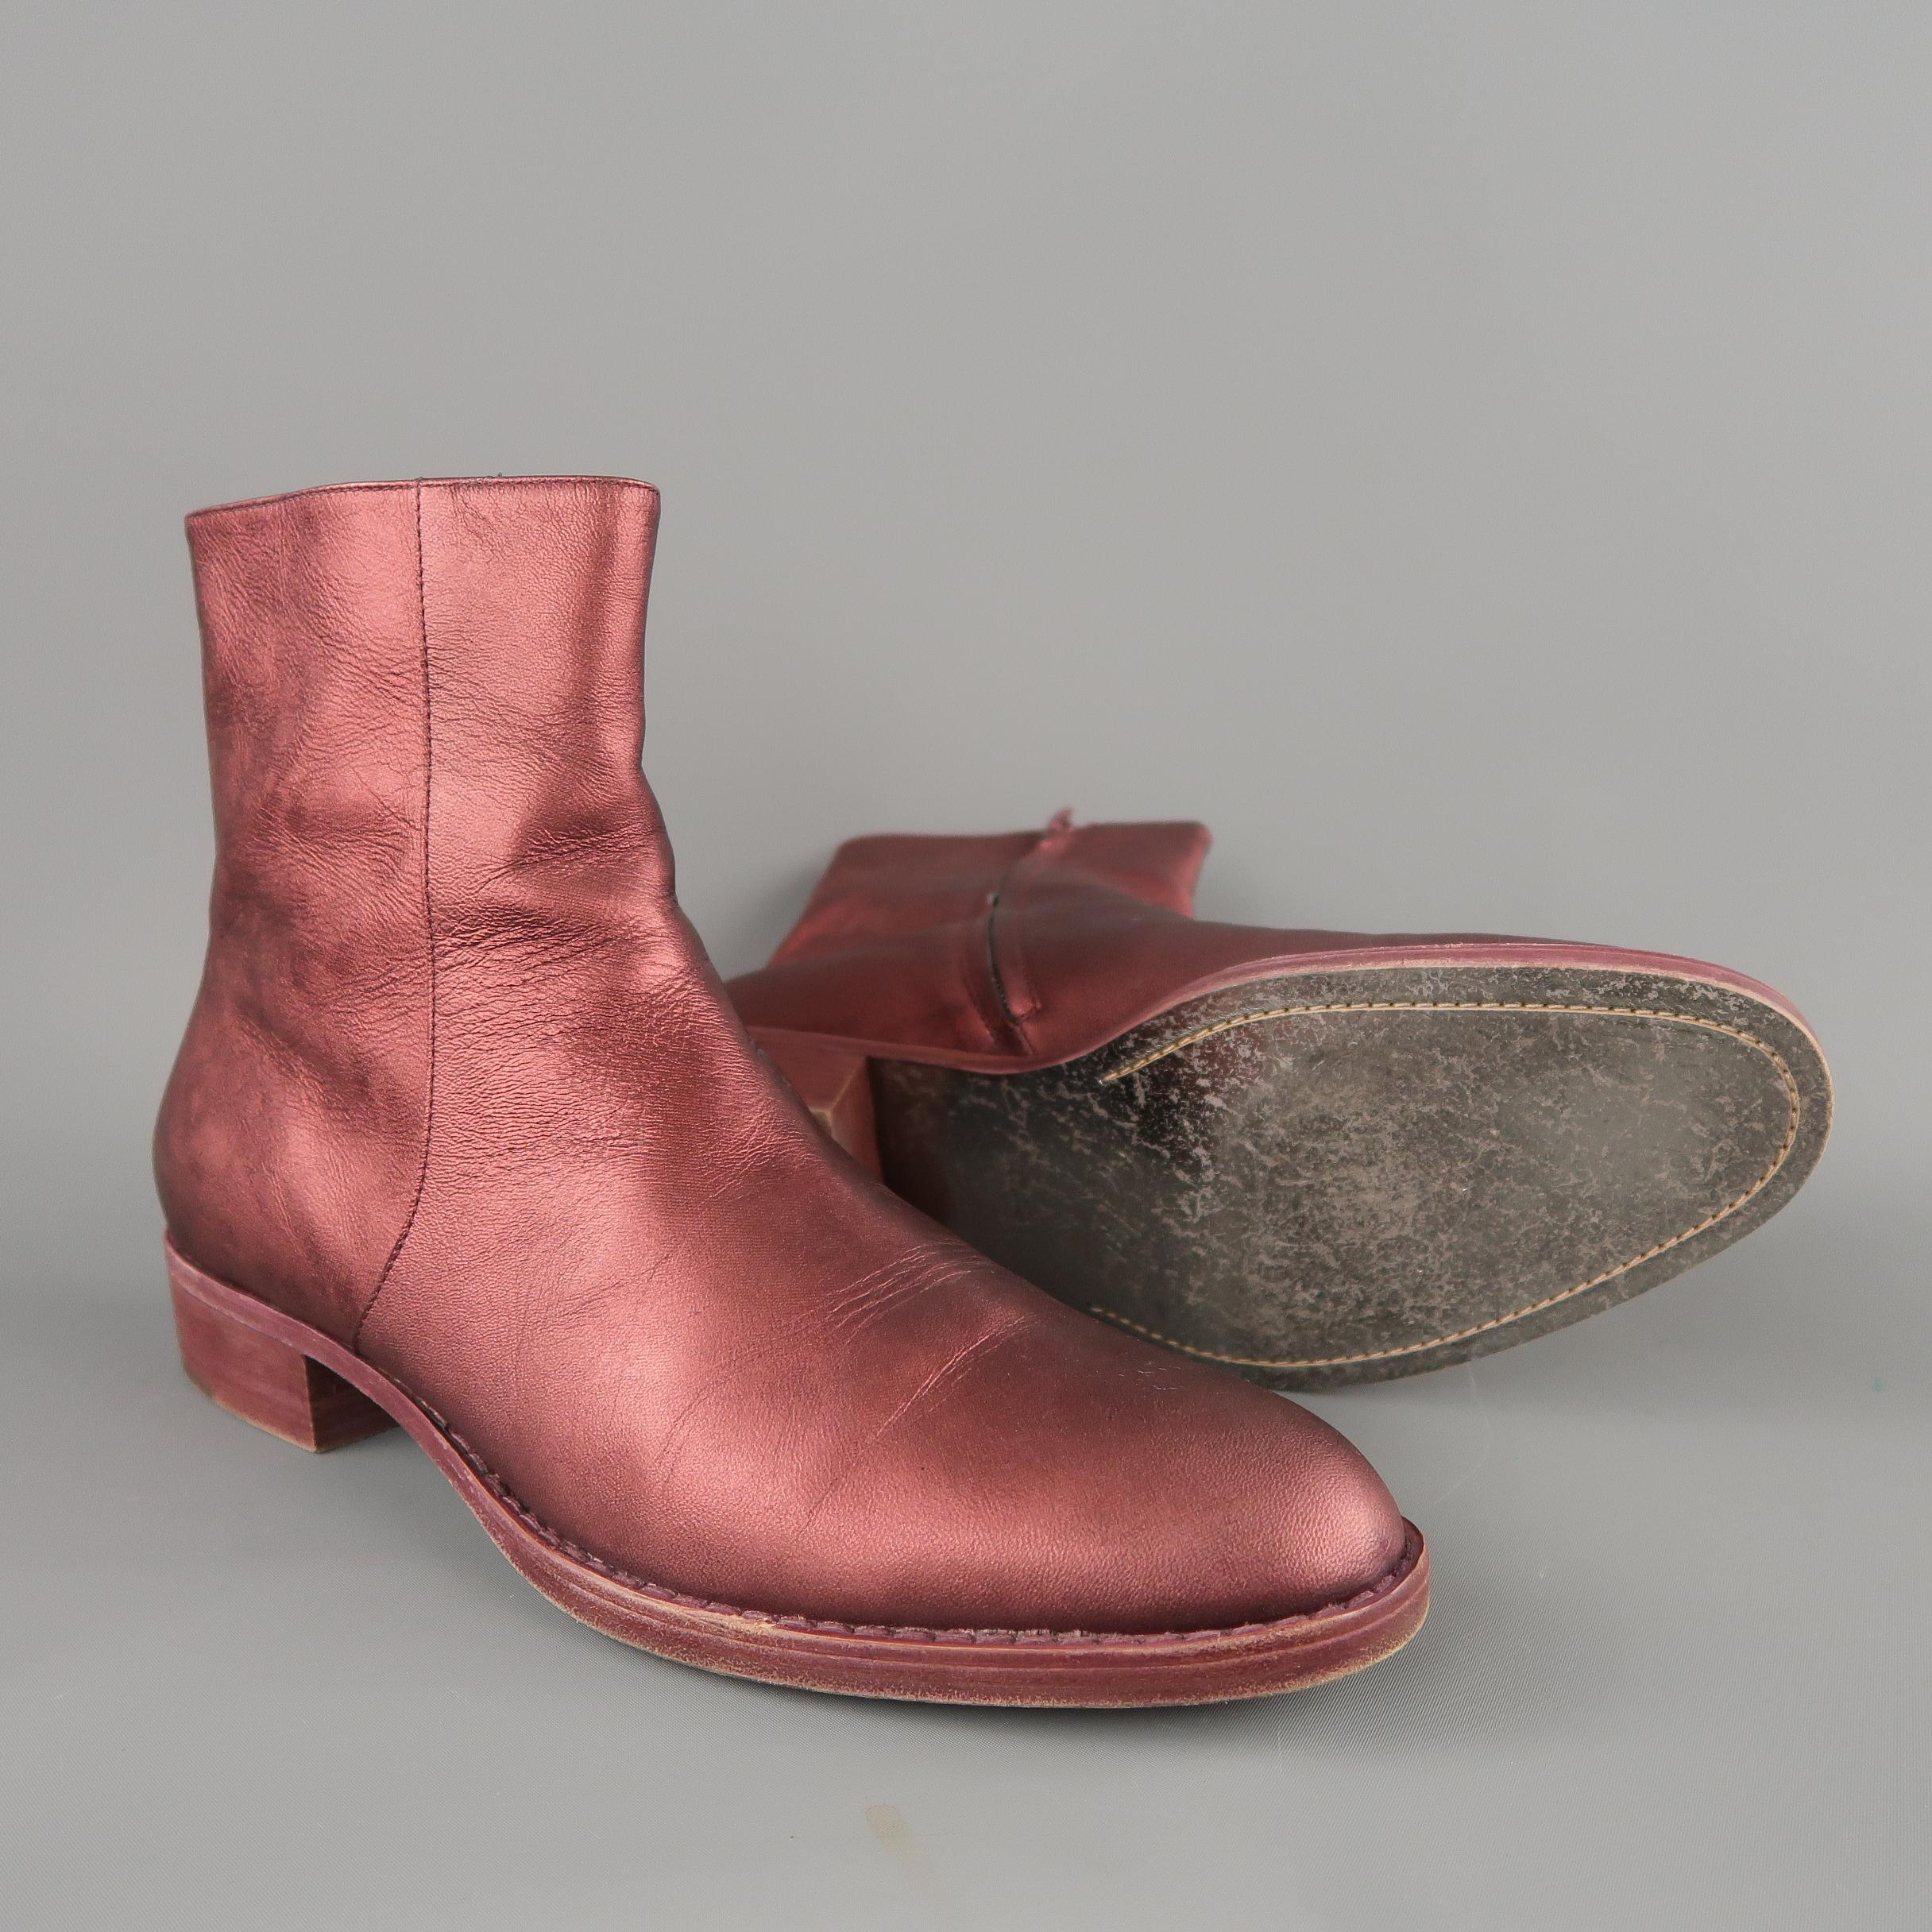 Pink ELSA Size 10.5 Burgundy Metallic Leather Ankle Boots